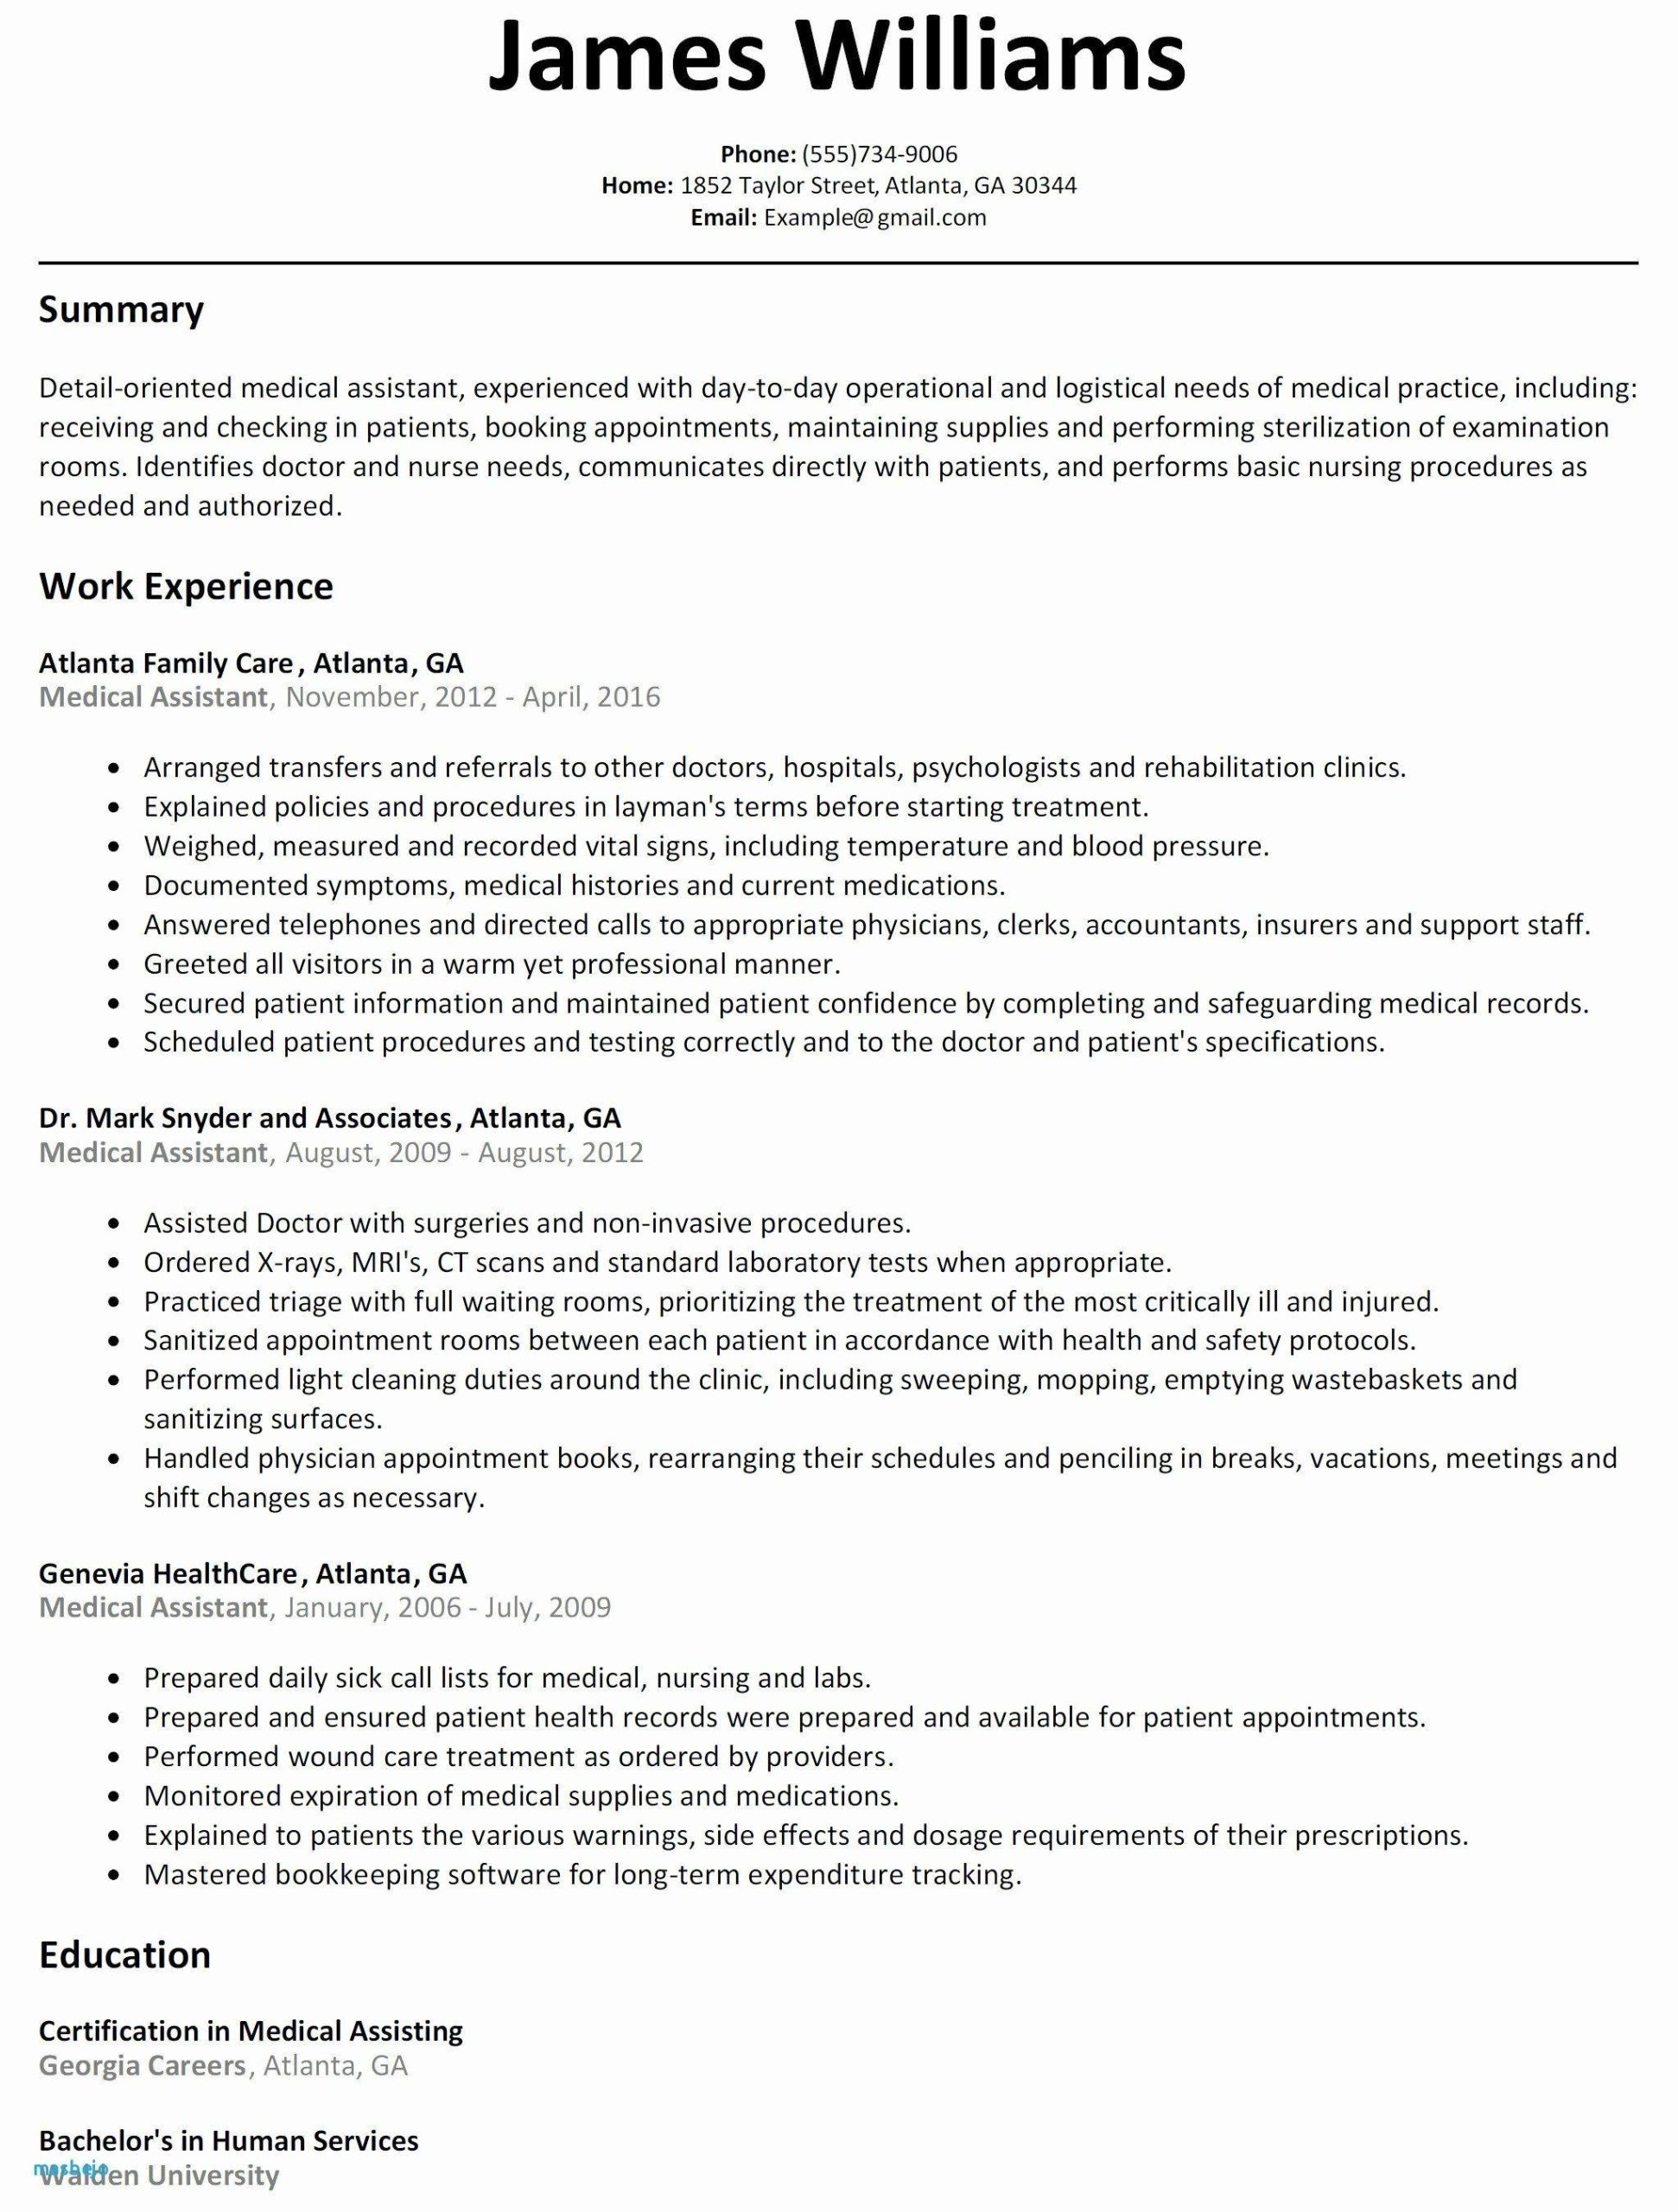 Physician Assistant Resume Examples